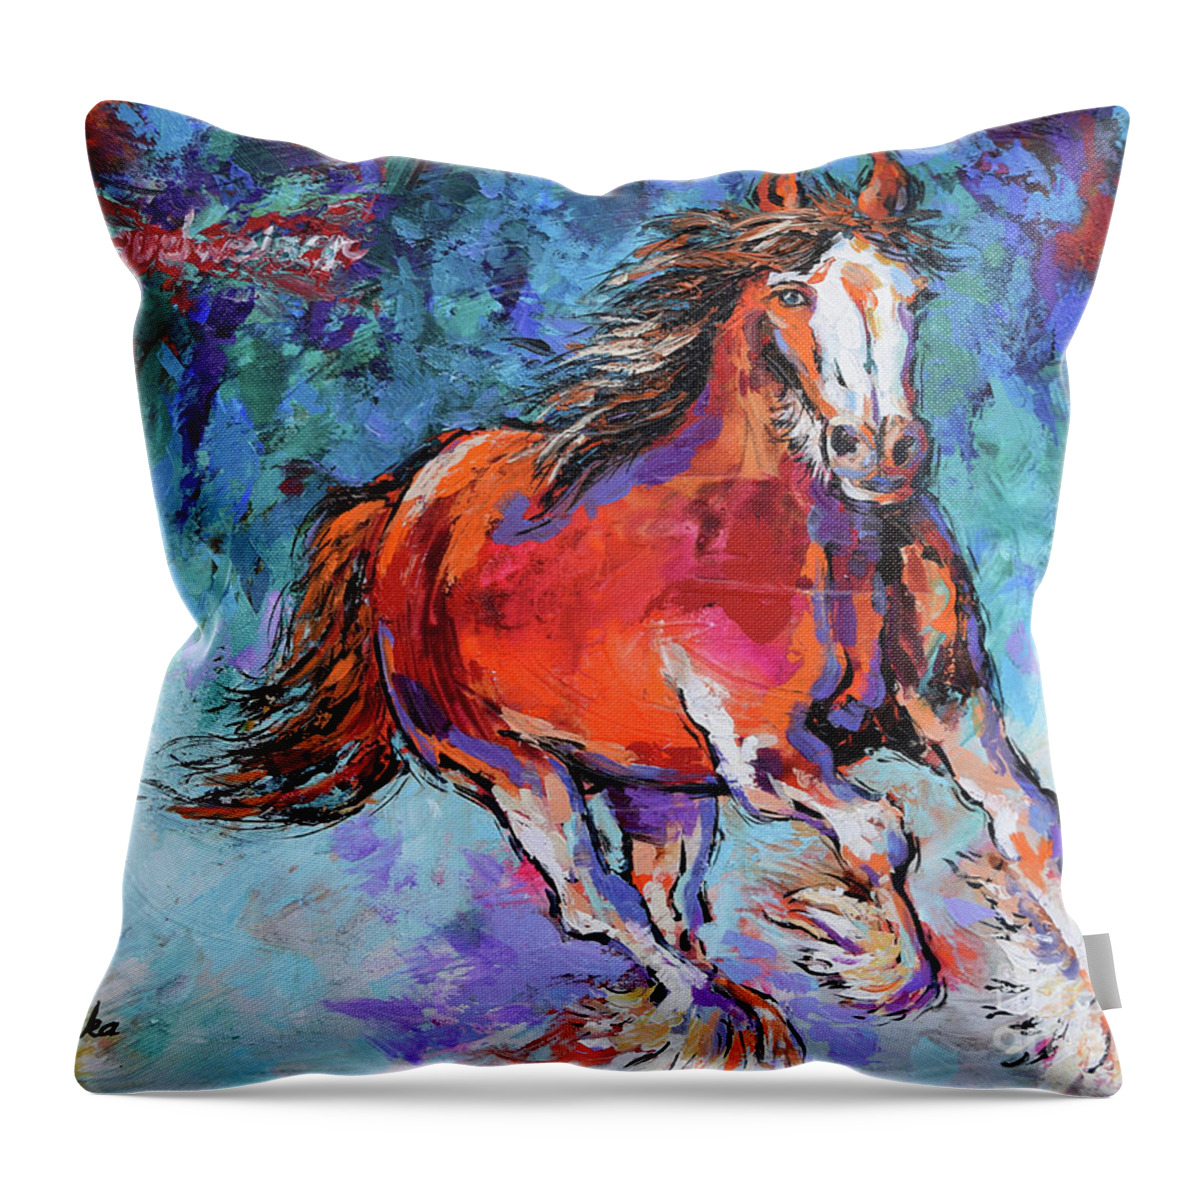  Throw Pillow featuring the painting Clydesdale by Jyotika Shroff